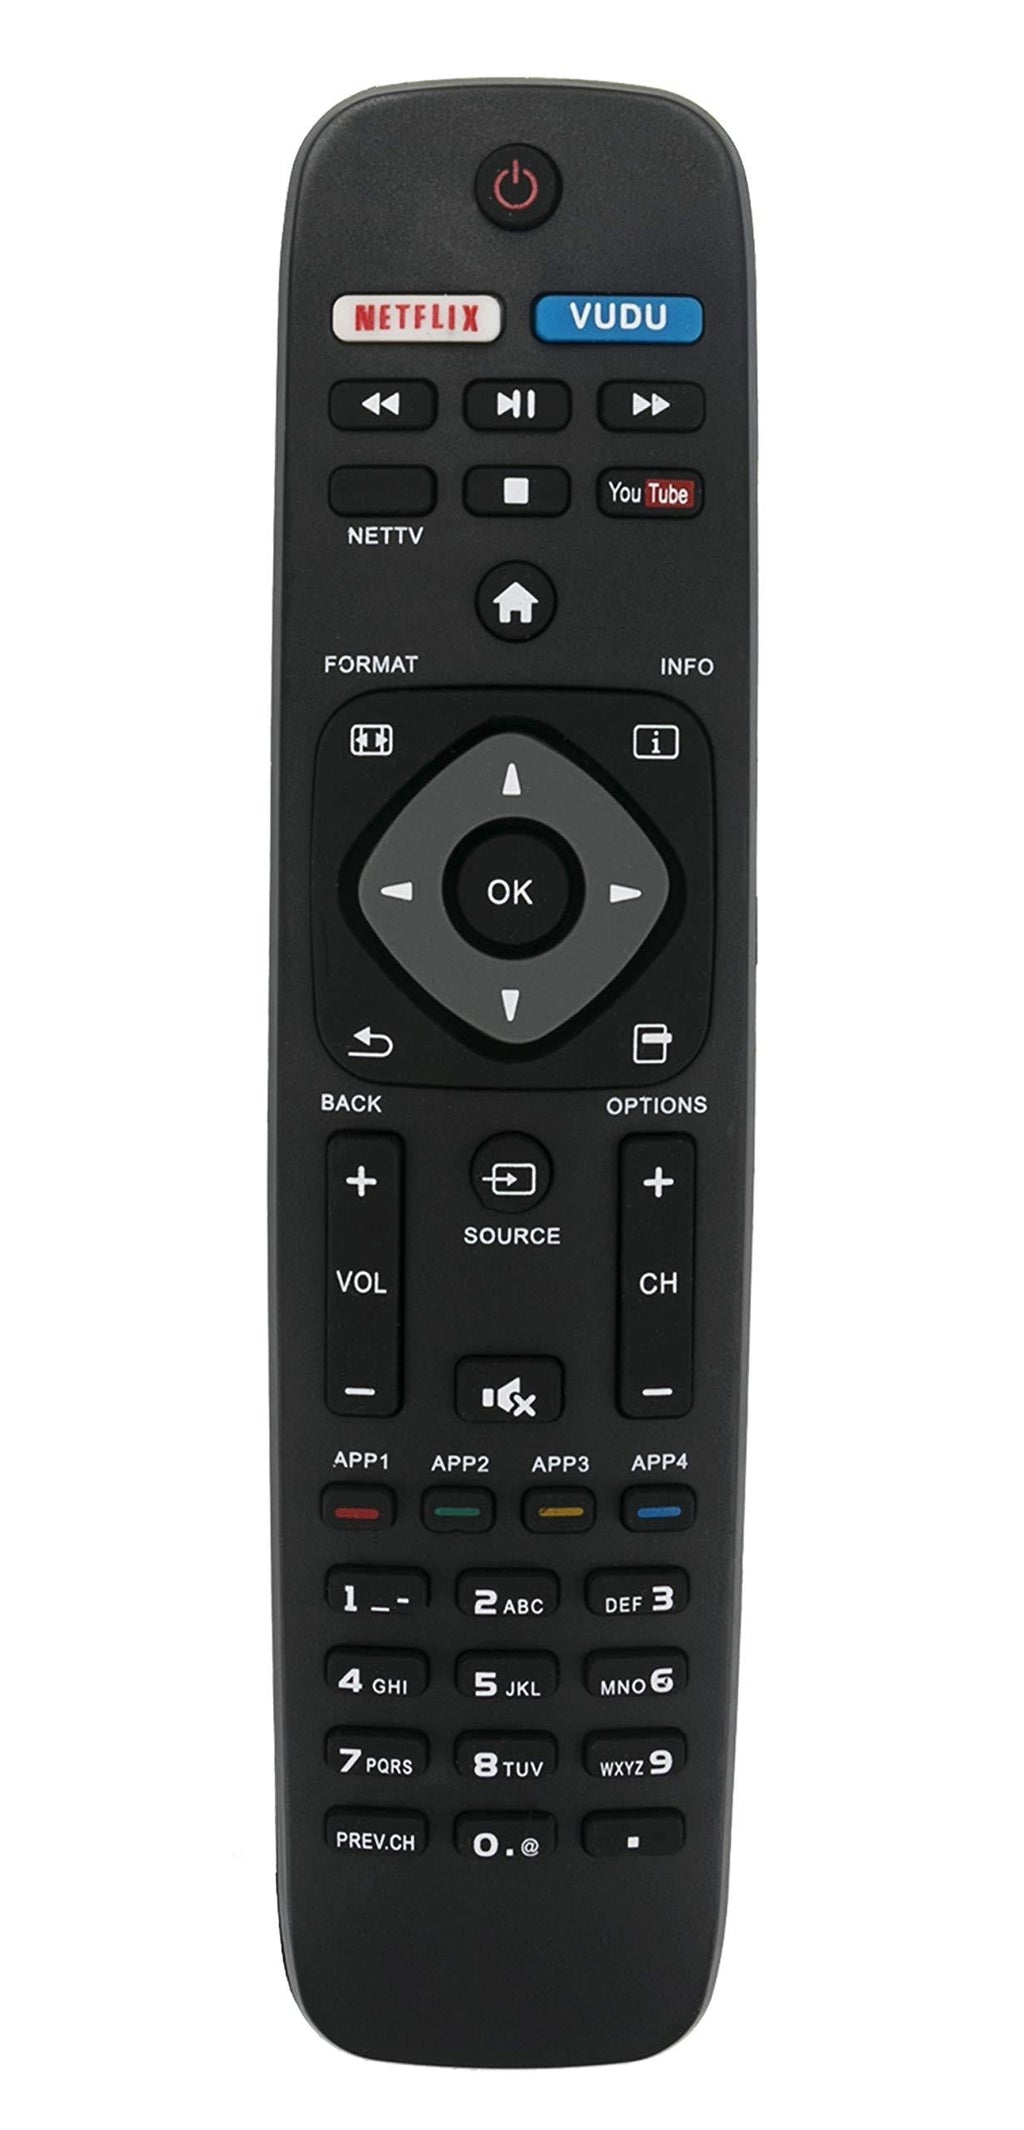 VINABTY Replaced Remote fit for Philips TV 43PFL4902 65PFL5602 55PFL5602 50PFL5602 43PFL5602 75PFL6601 32PFL4902 40PFL4901 43PFL4901 43PFL4902 50PFL4901 50PFL5601 50PFL5602 50PFL6602/F7 NH500UP - LeoForward Australia